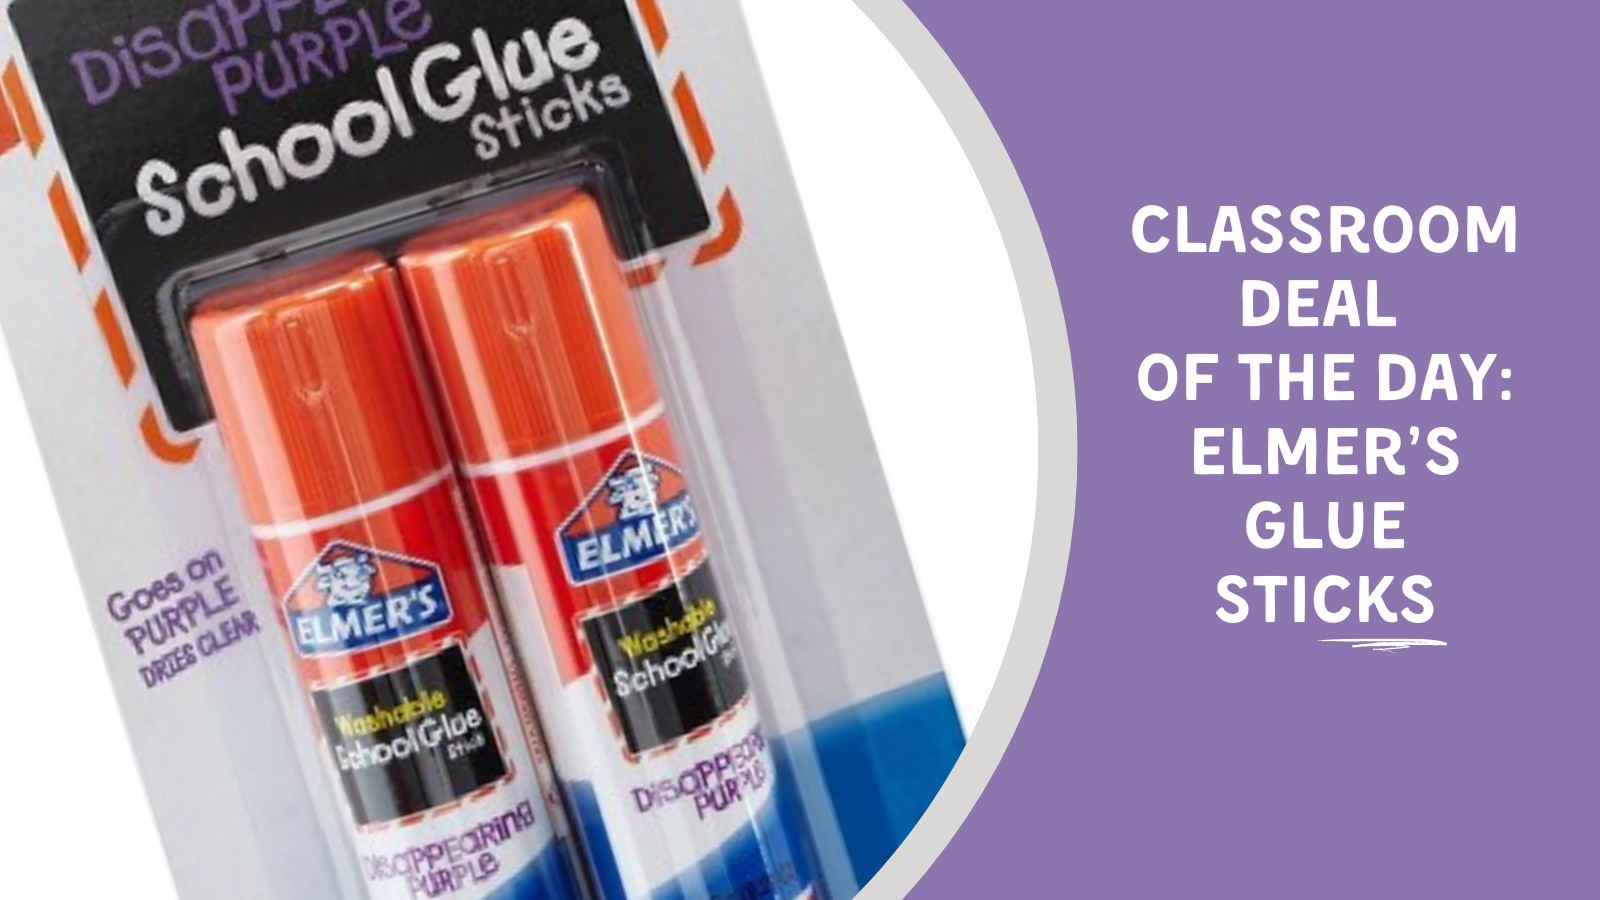 Deal of the Day Elmers Glue Sticks